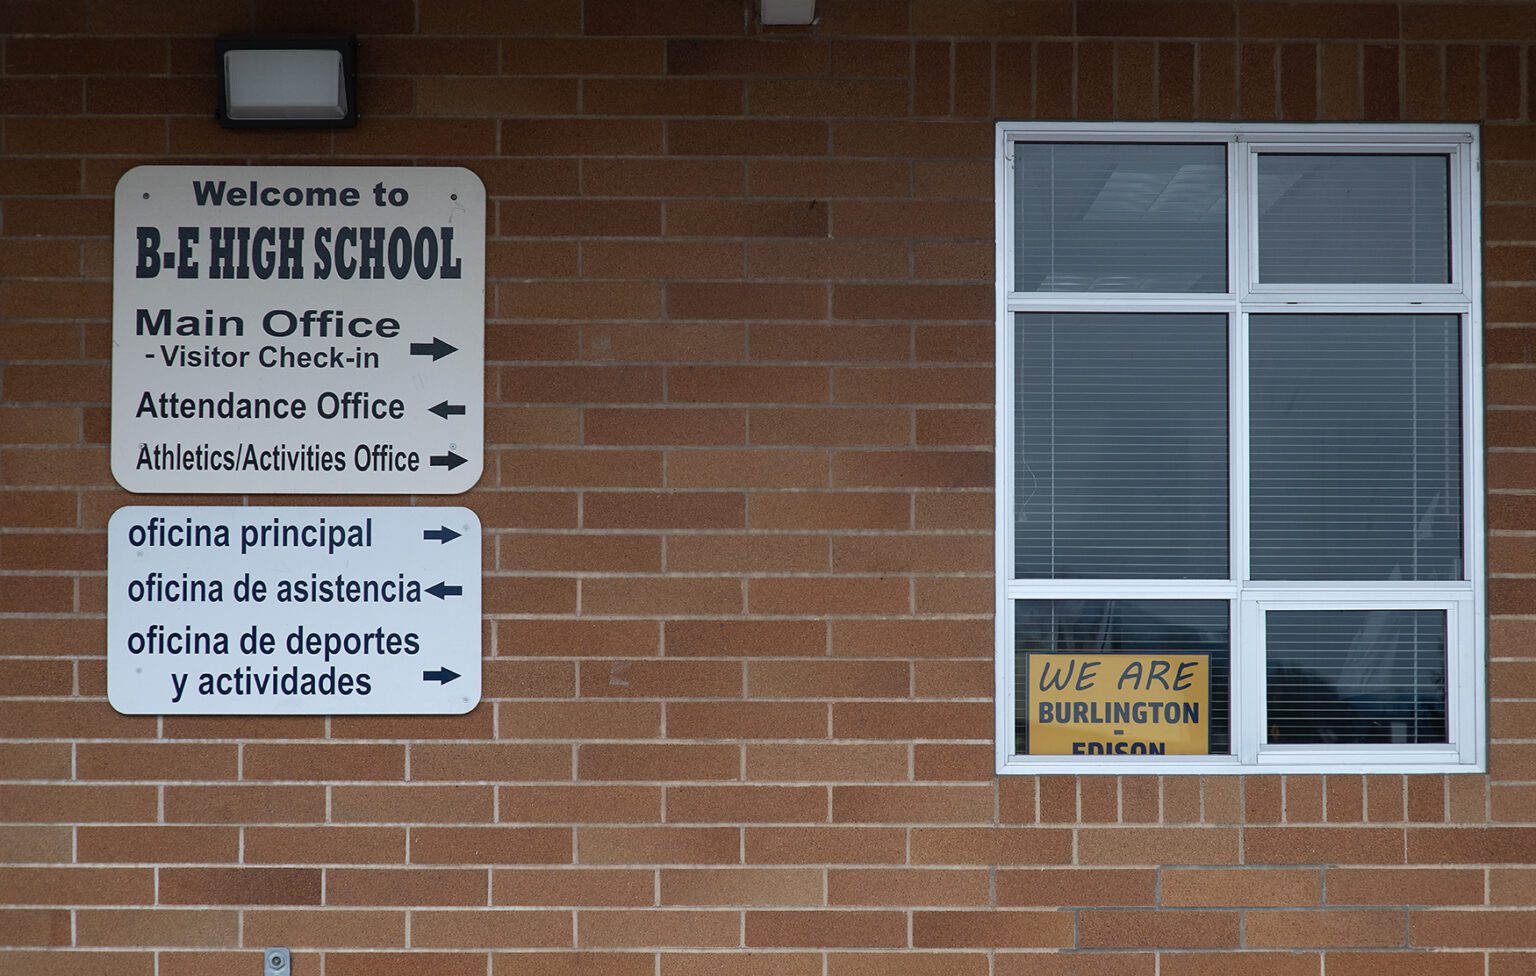 Directional signs on a brick wall are placed next to a window with a yellow sign that reads " We are Burlington - Edison".